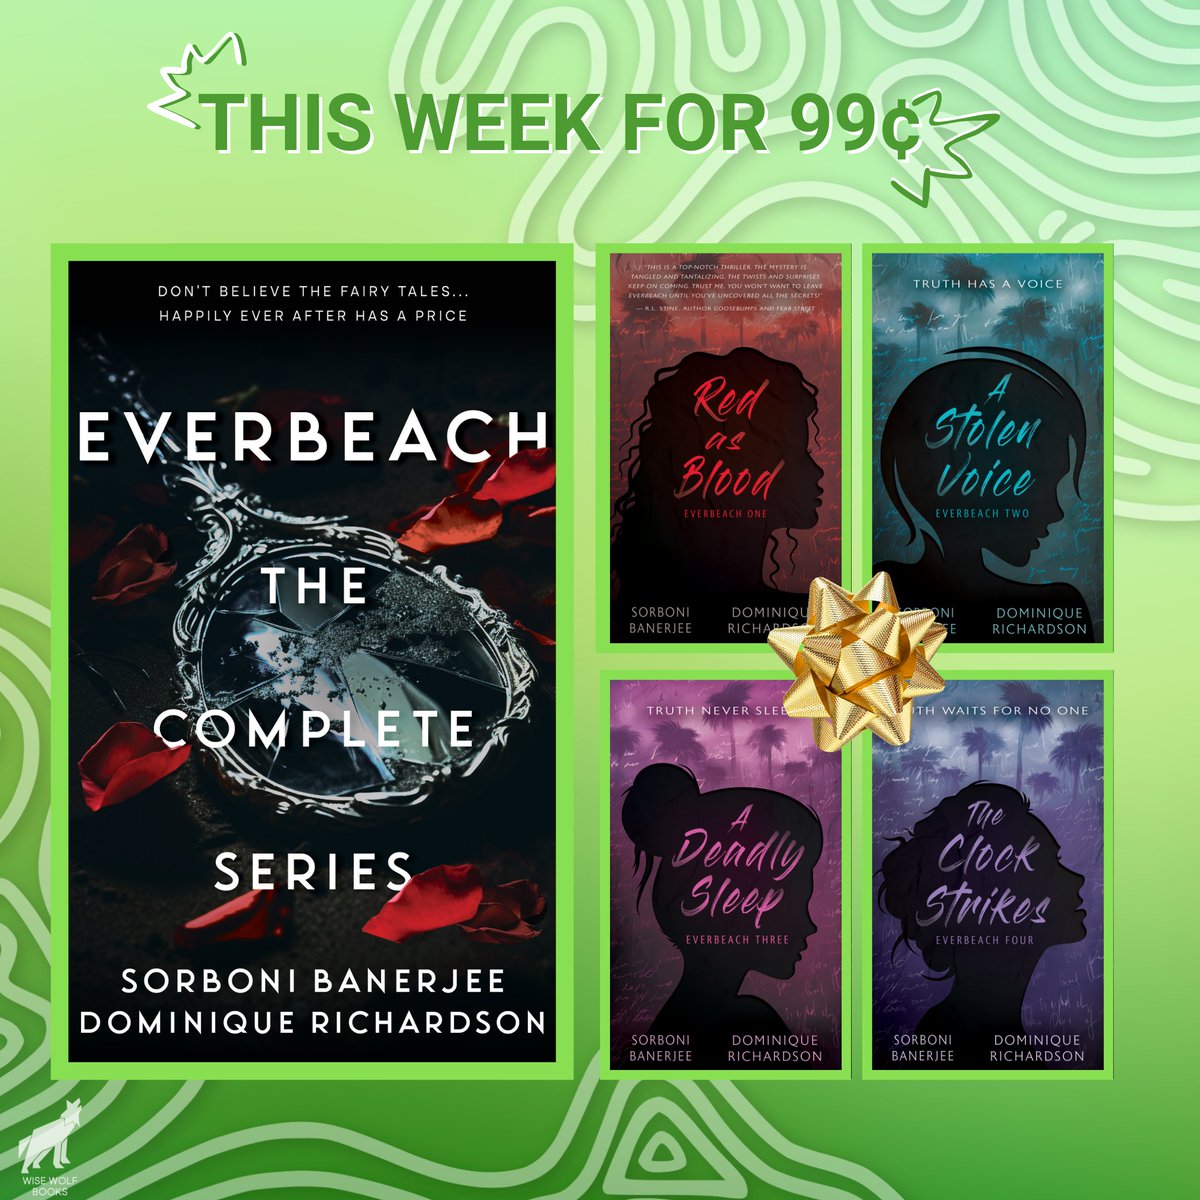 On sale now! Mystery and magic collide at Everbeach, where nothing is as it seems 🌊📚

From dark secrets to dangerous liaisons, 'Everbeach: The Complete Series' is your ticket to a whirlwind of drama. Delve into the stories that redefine fairy tales this week for only 99¢!